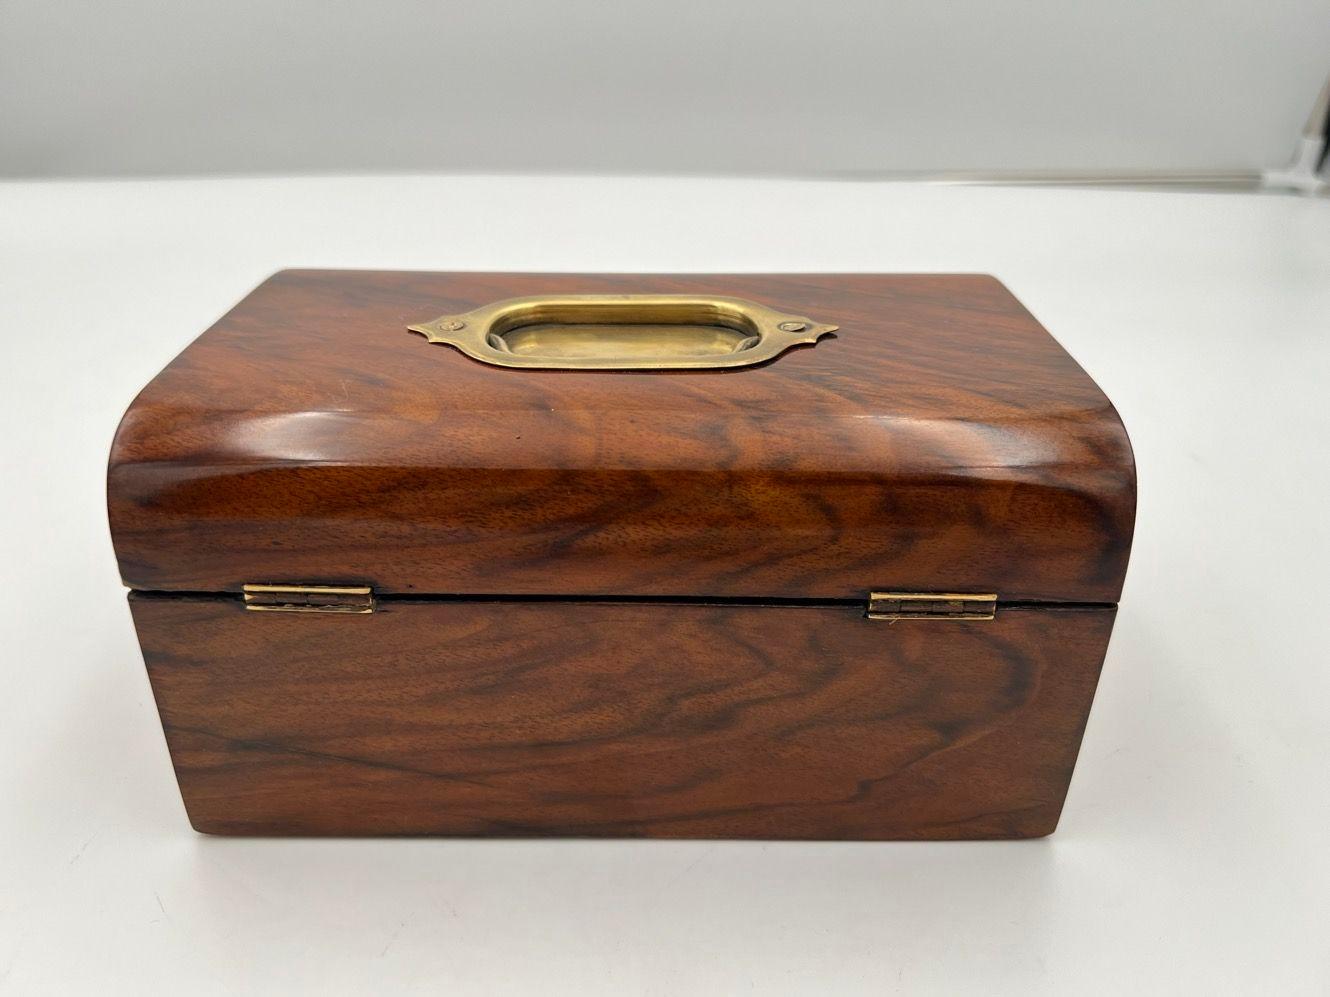 Antique Decorative Box, Walnut Veneer and Brass, South Germany, circa 1850 For Sale 4